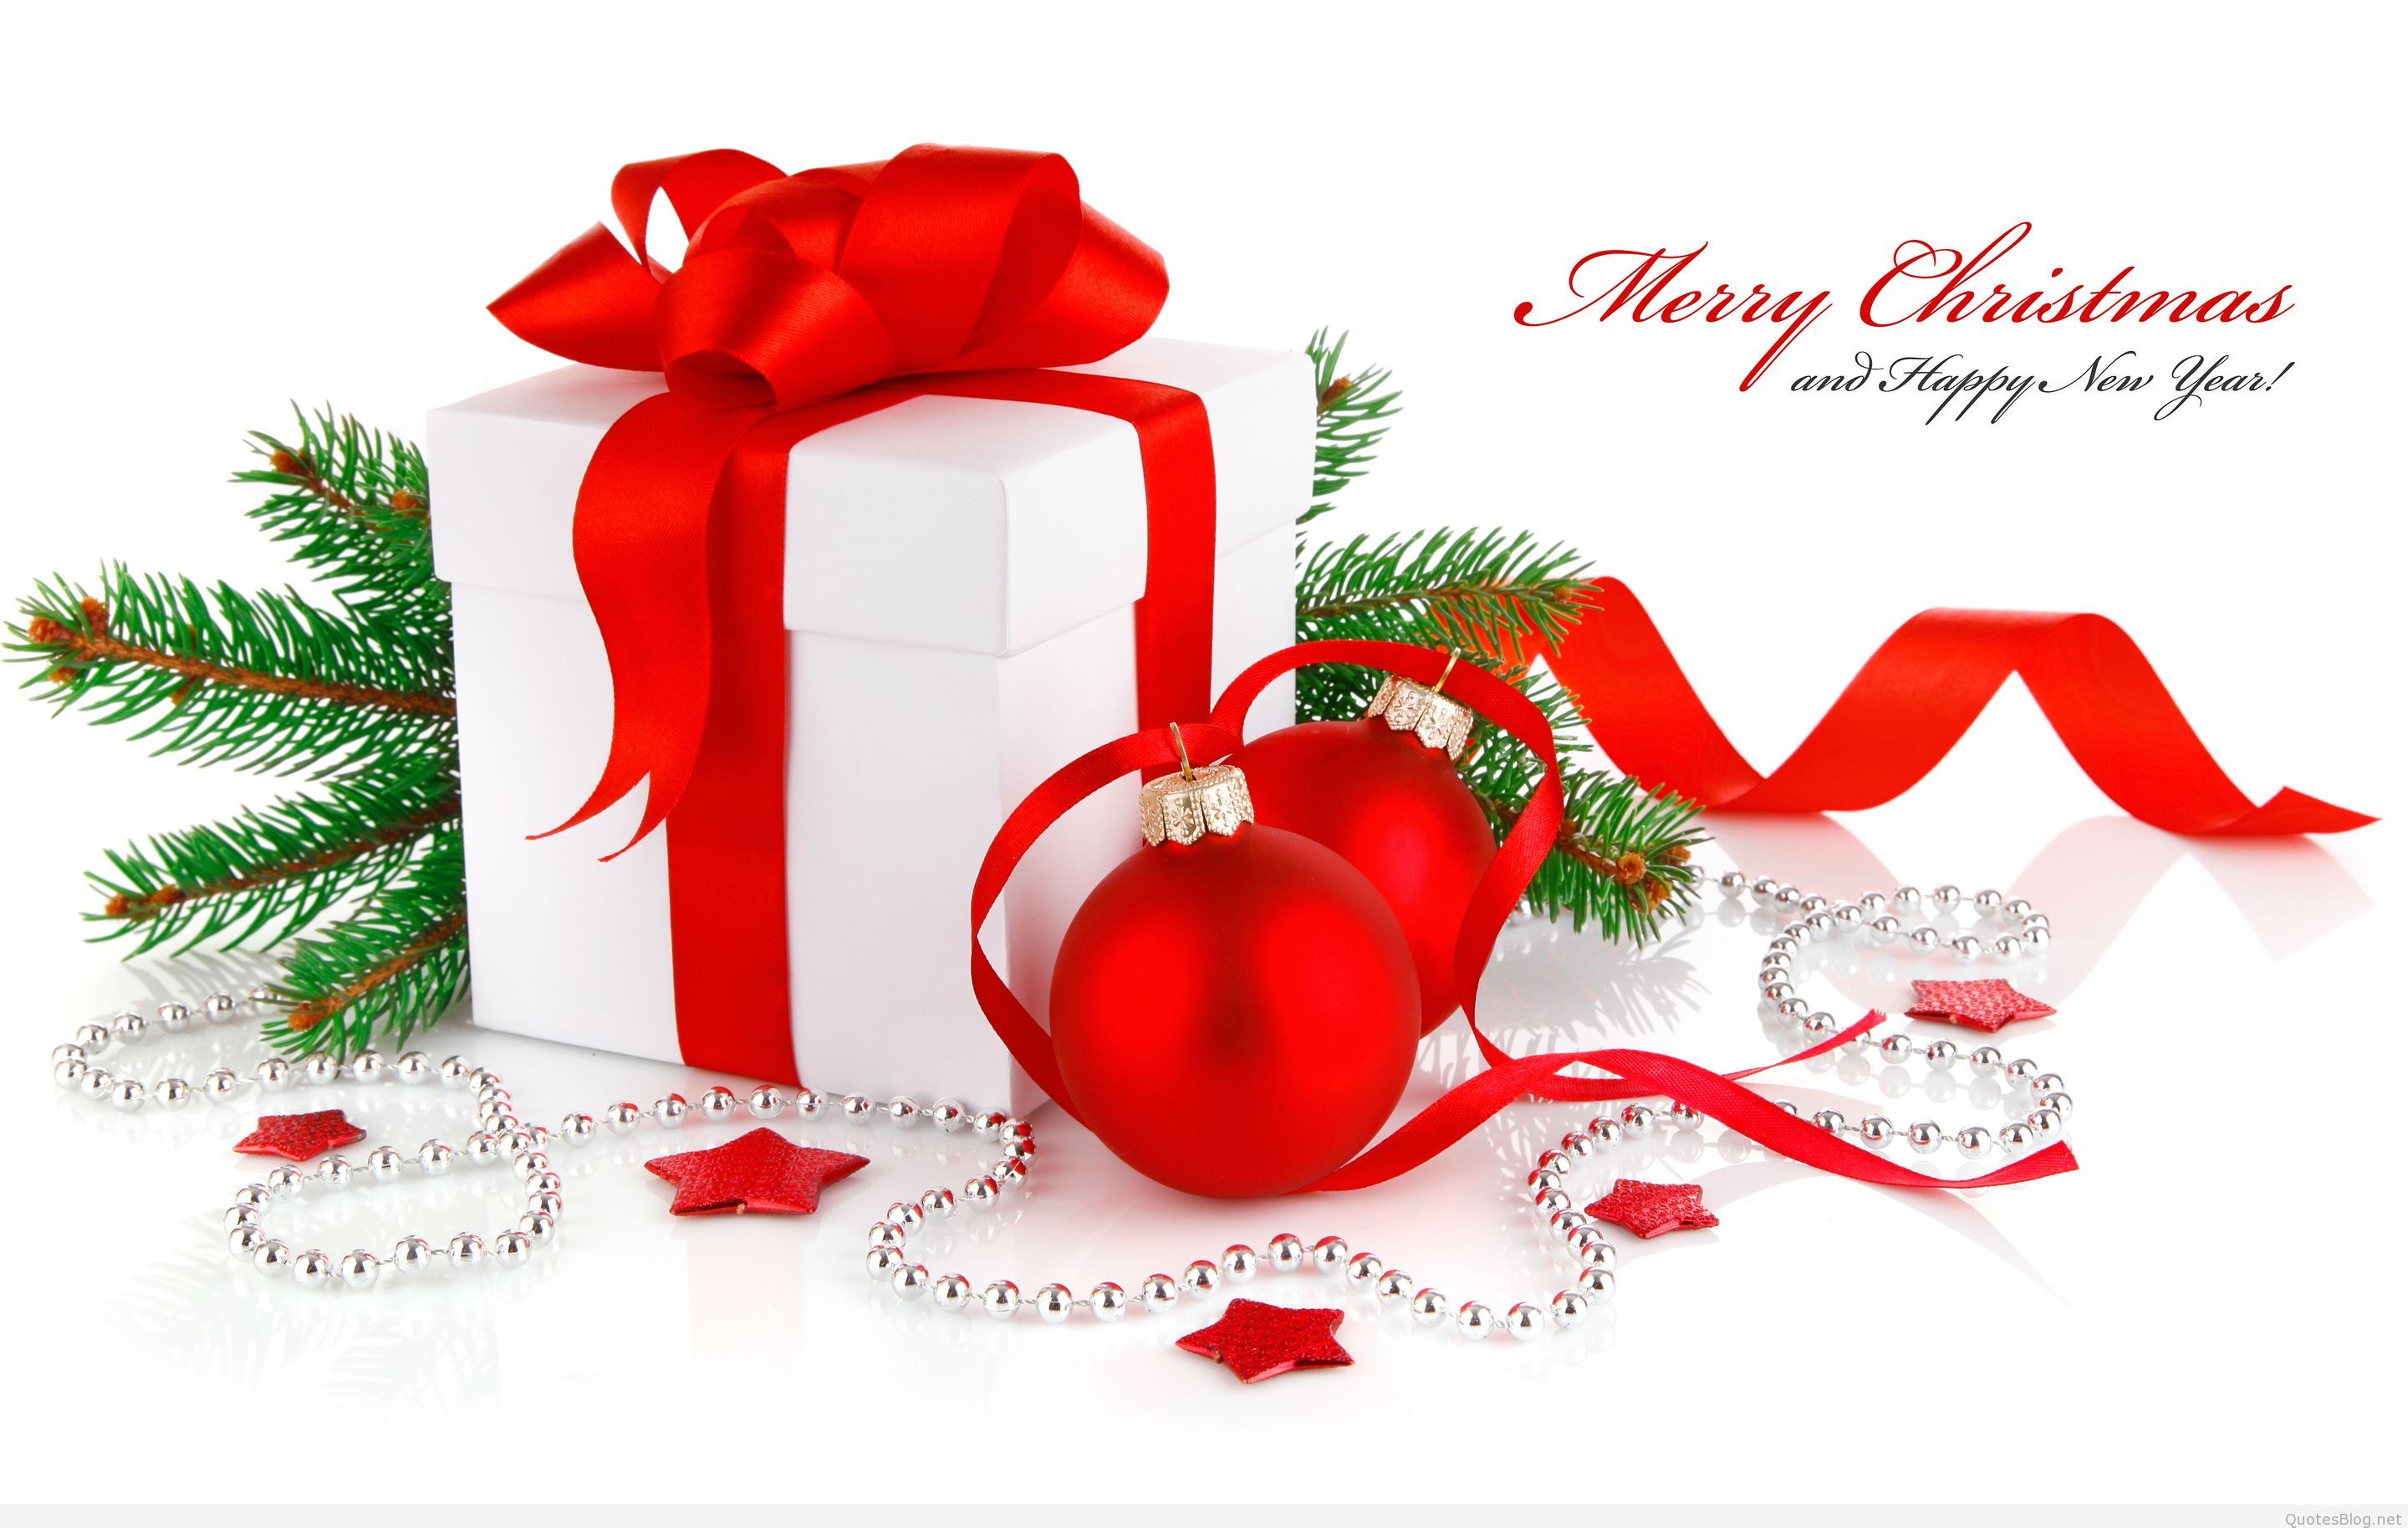 Merry Christmas & happy new year 2016 wishes